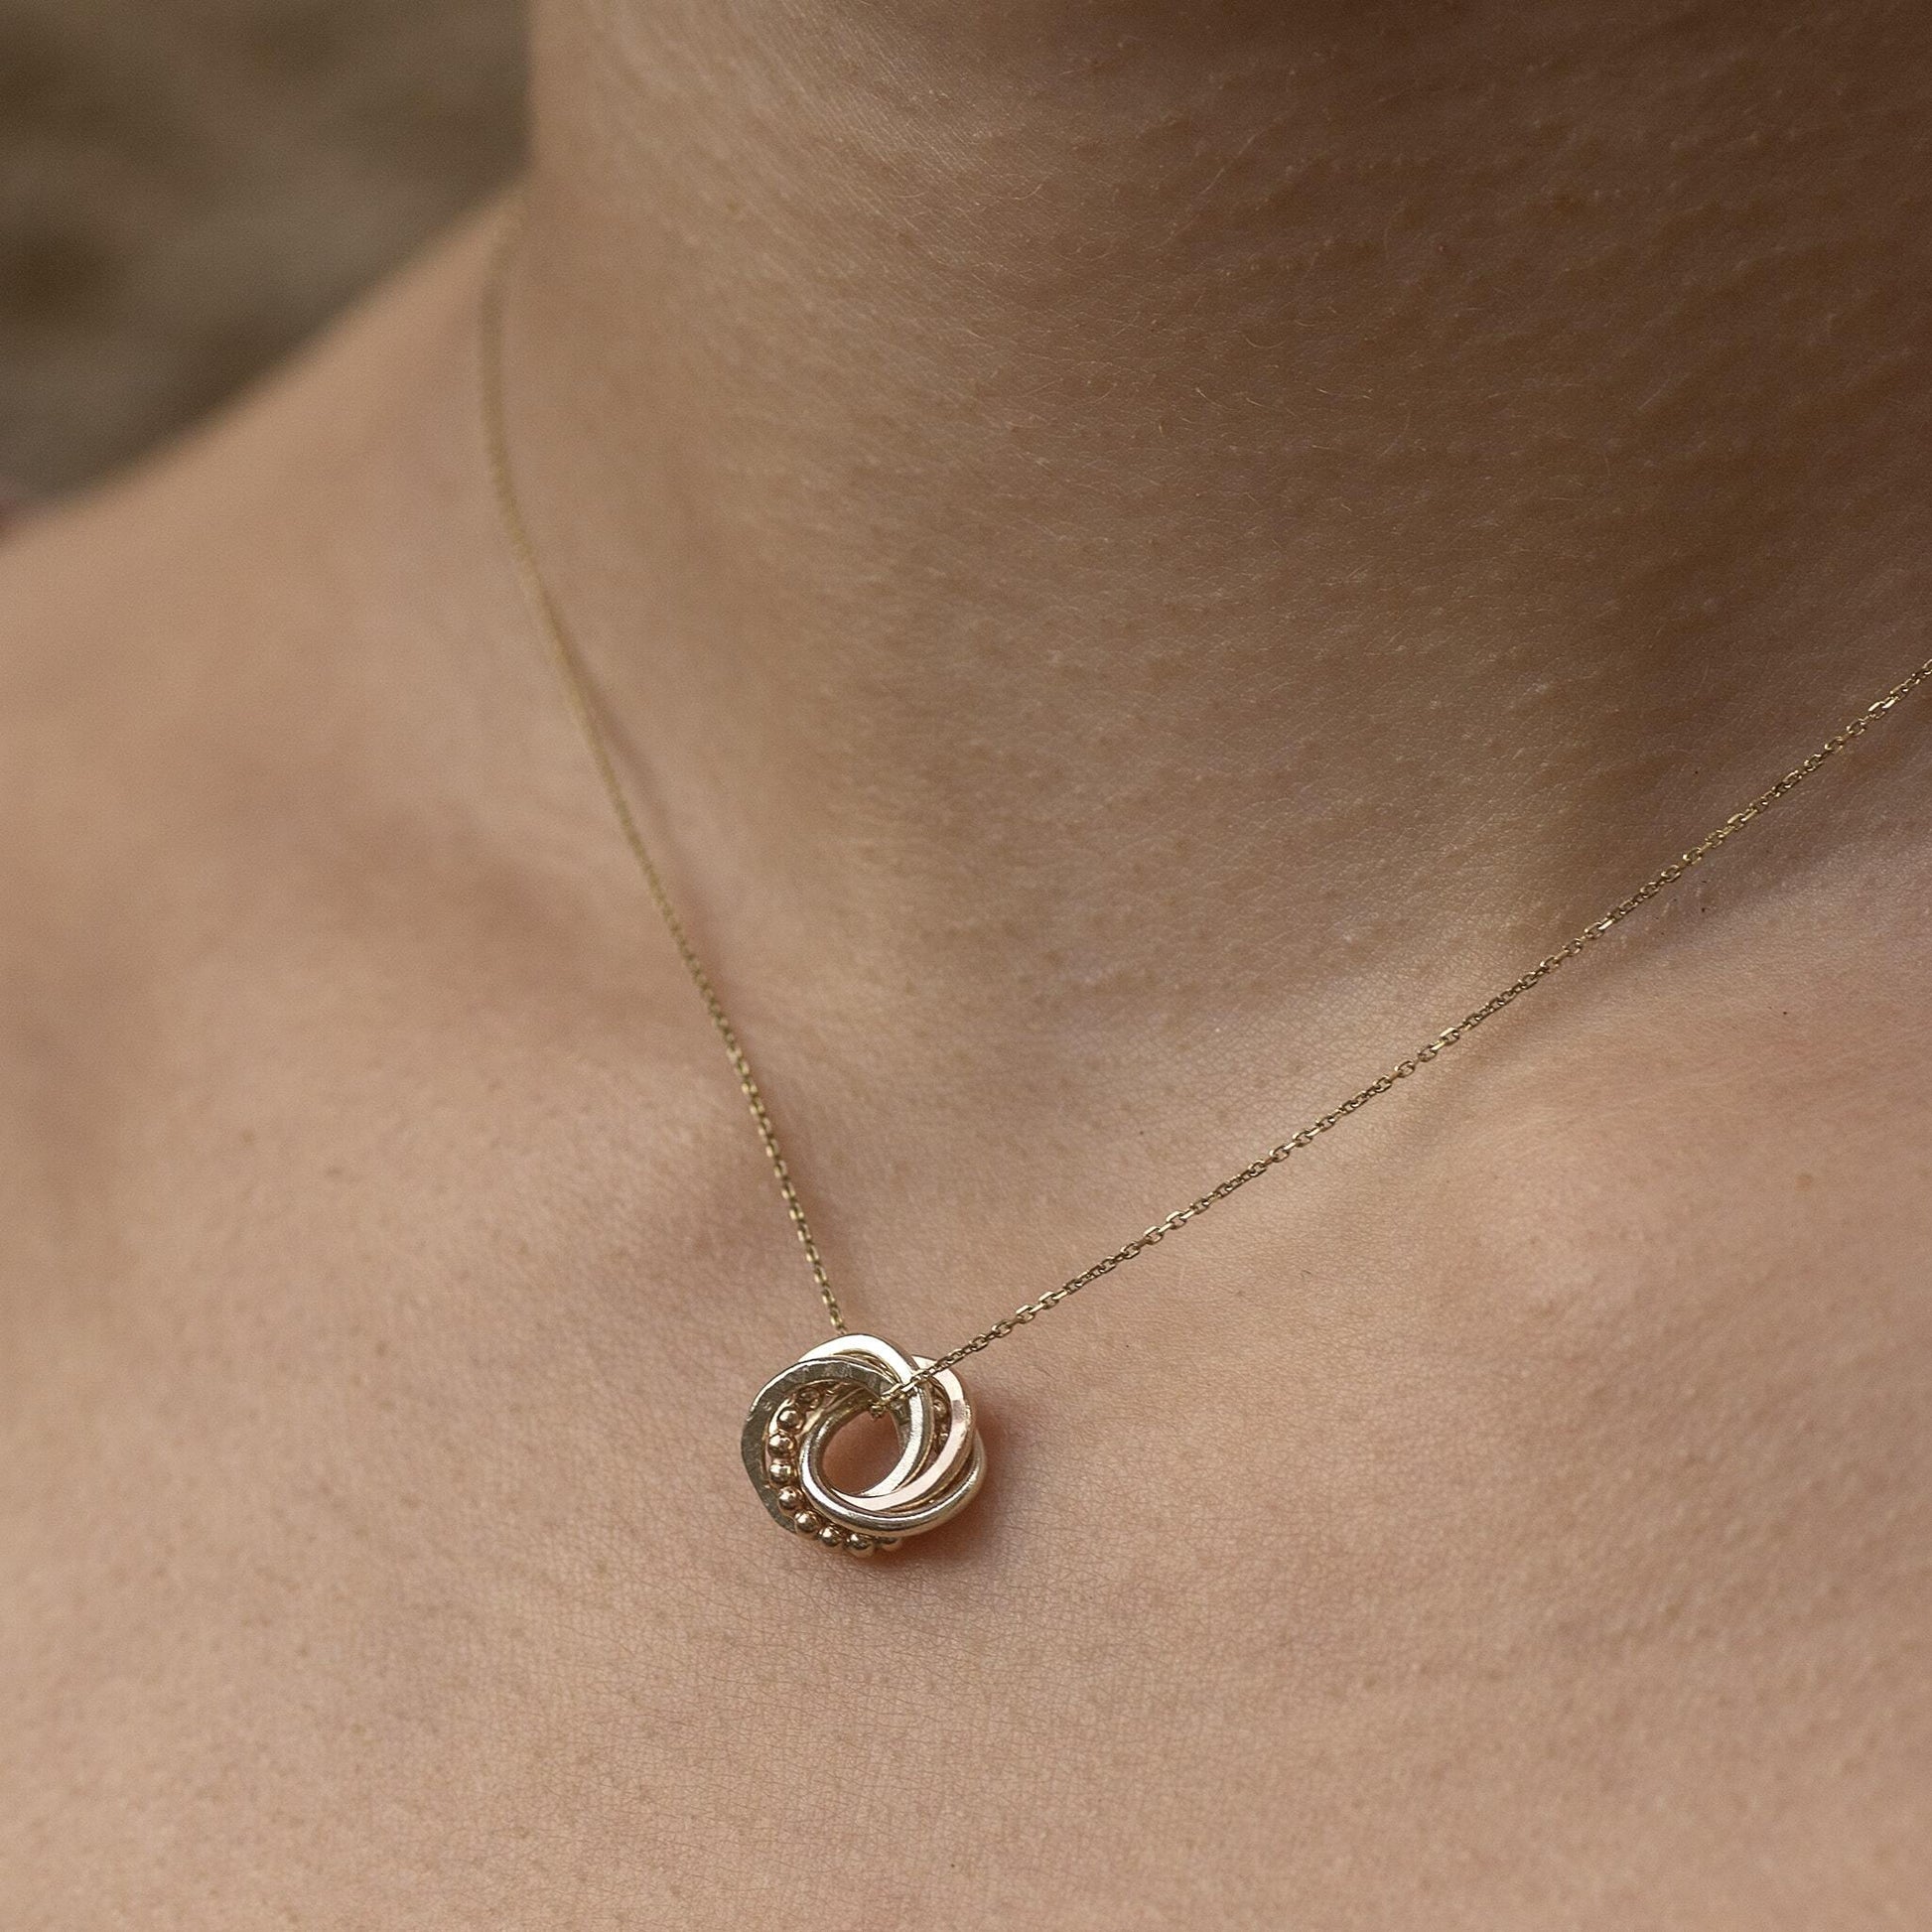 9kt Gold 5th Anniversary Love Knot Necklace -  The Original 5 Links for 5 Years Necklace - Recycled Gold, Rose Gold & White Gold